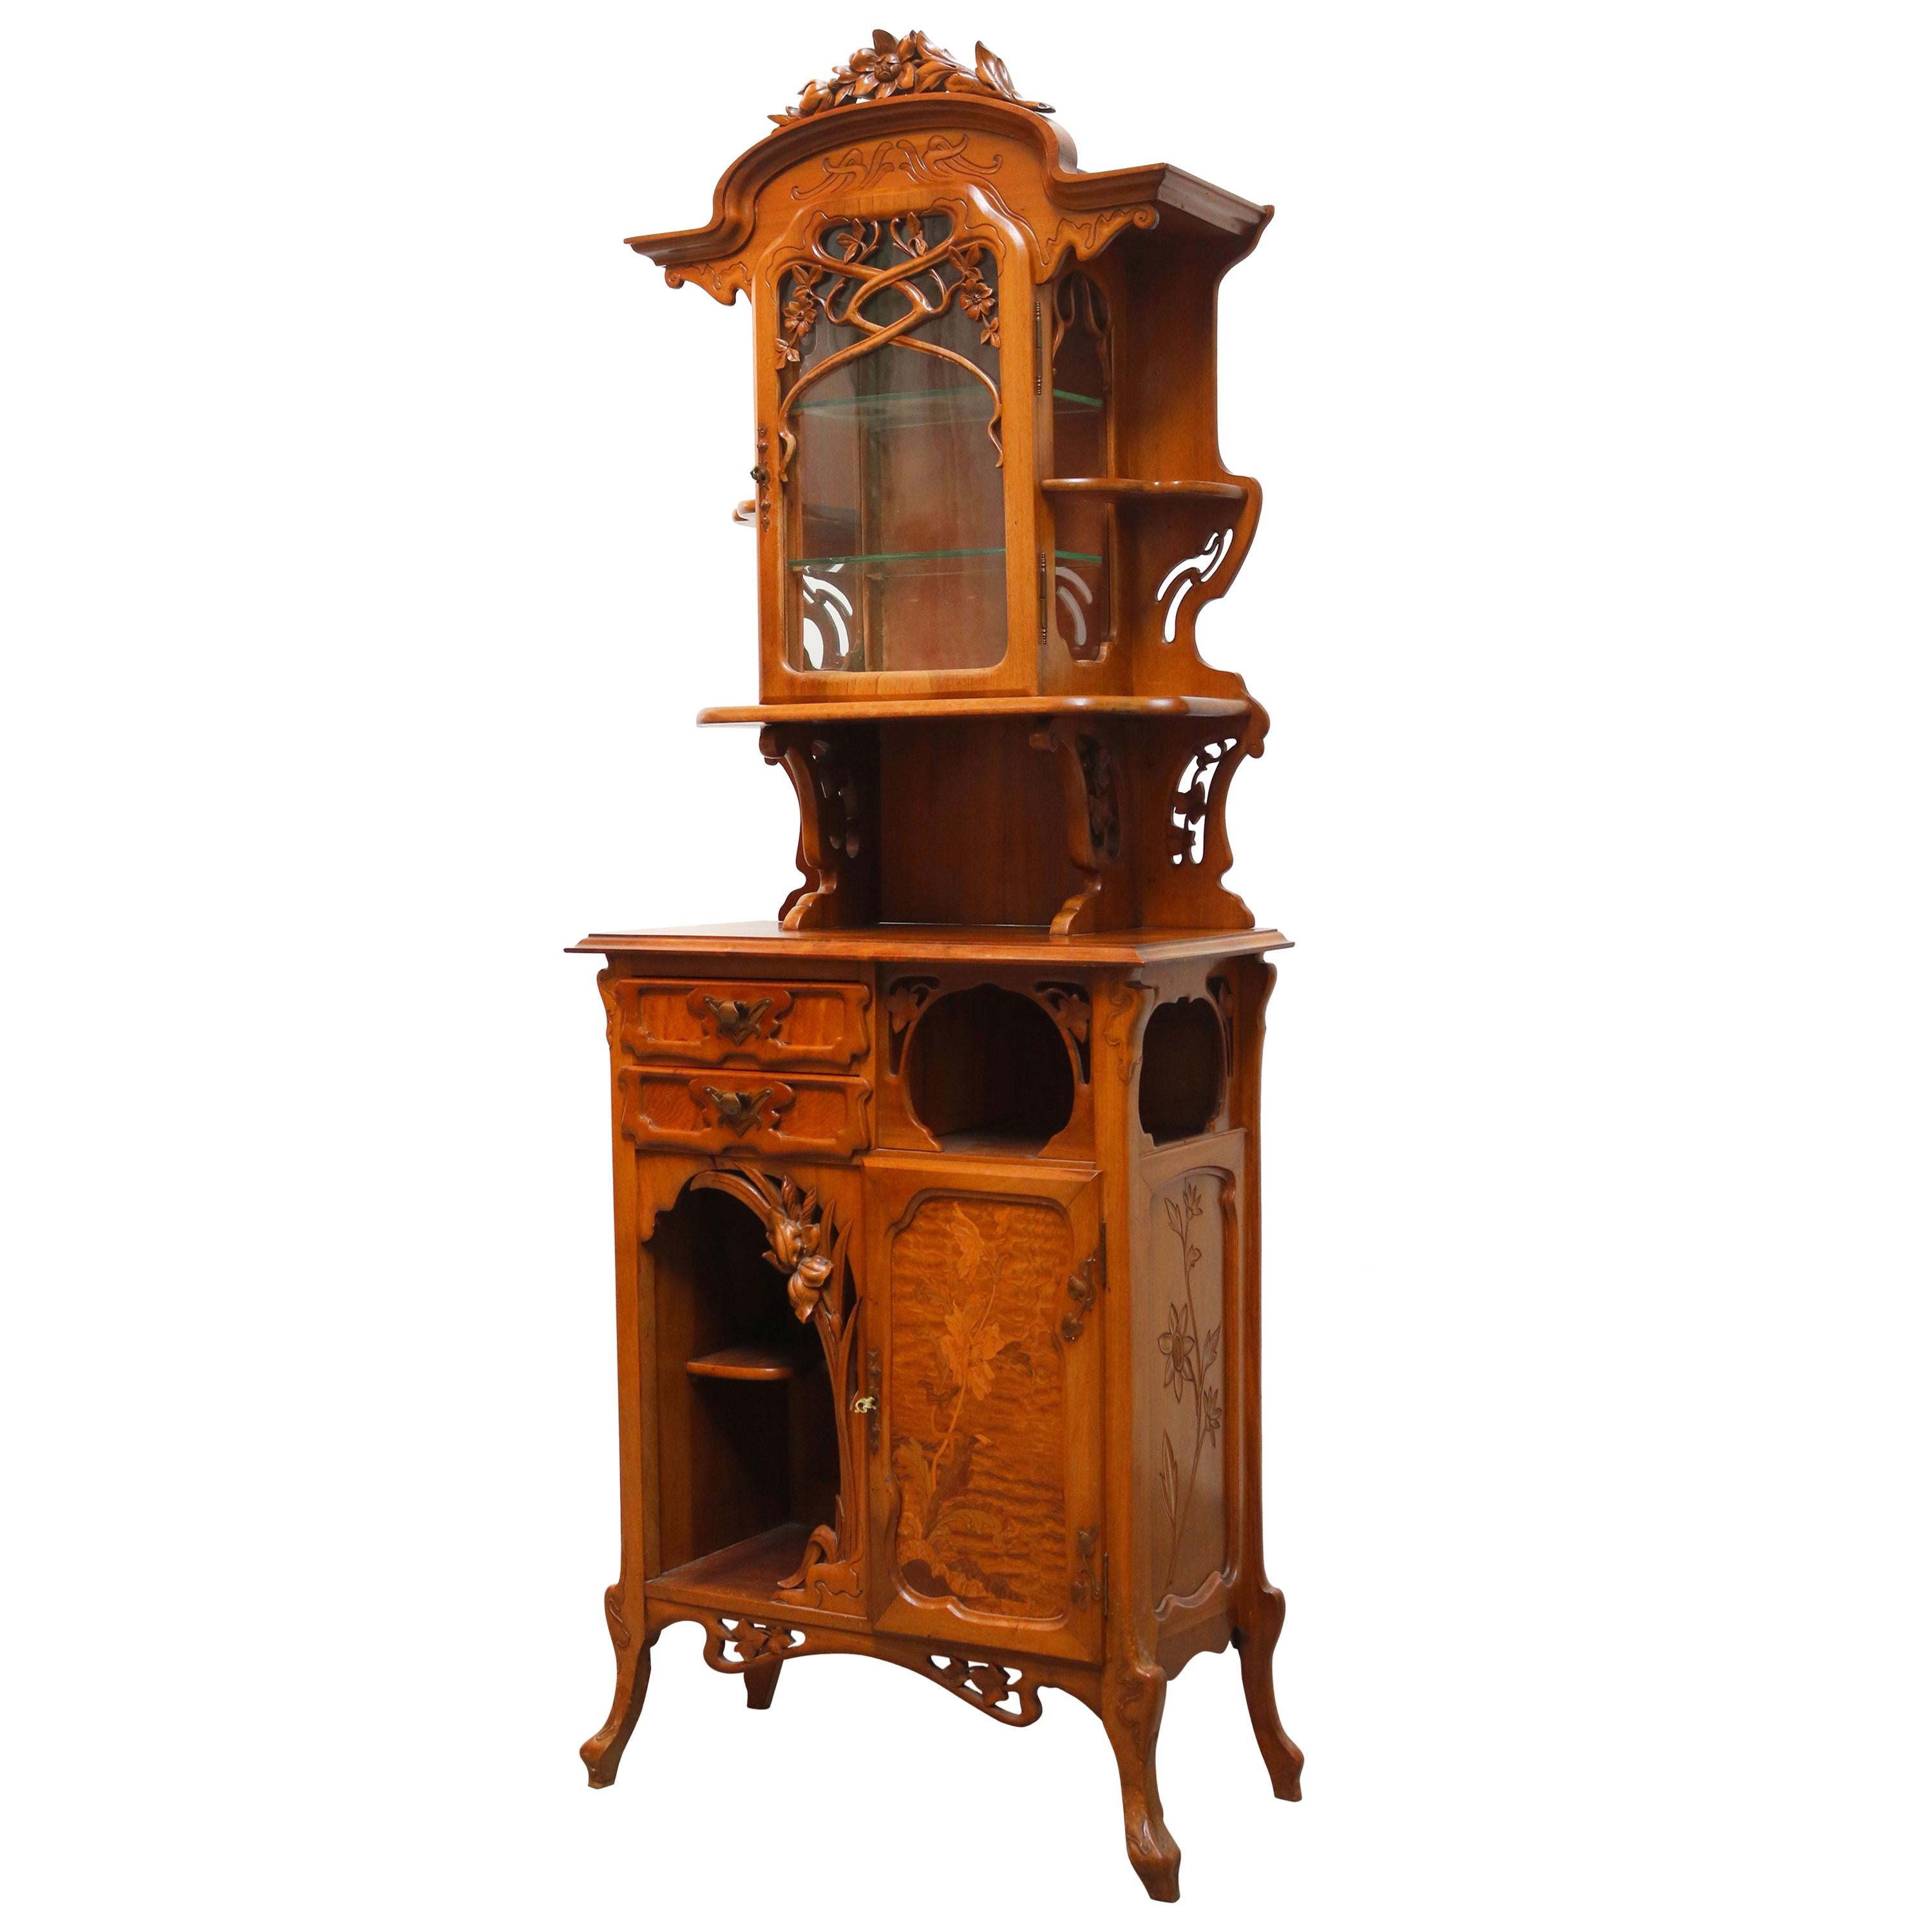 Gorgeous French Art Nouveau Cabinet / Display Cabinet with Marquetry, 1890